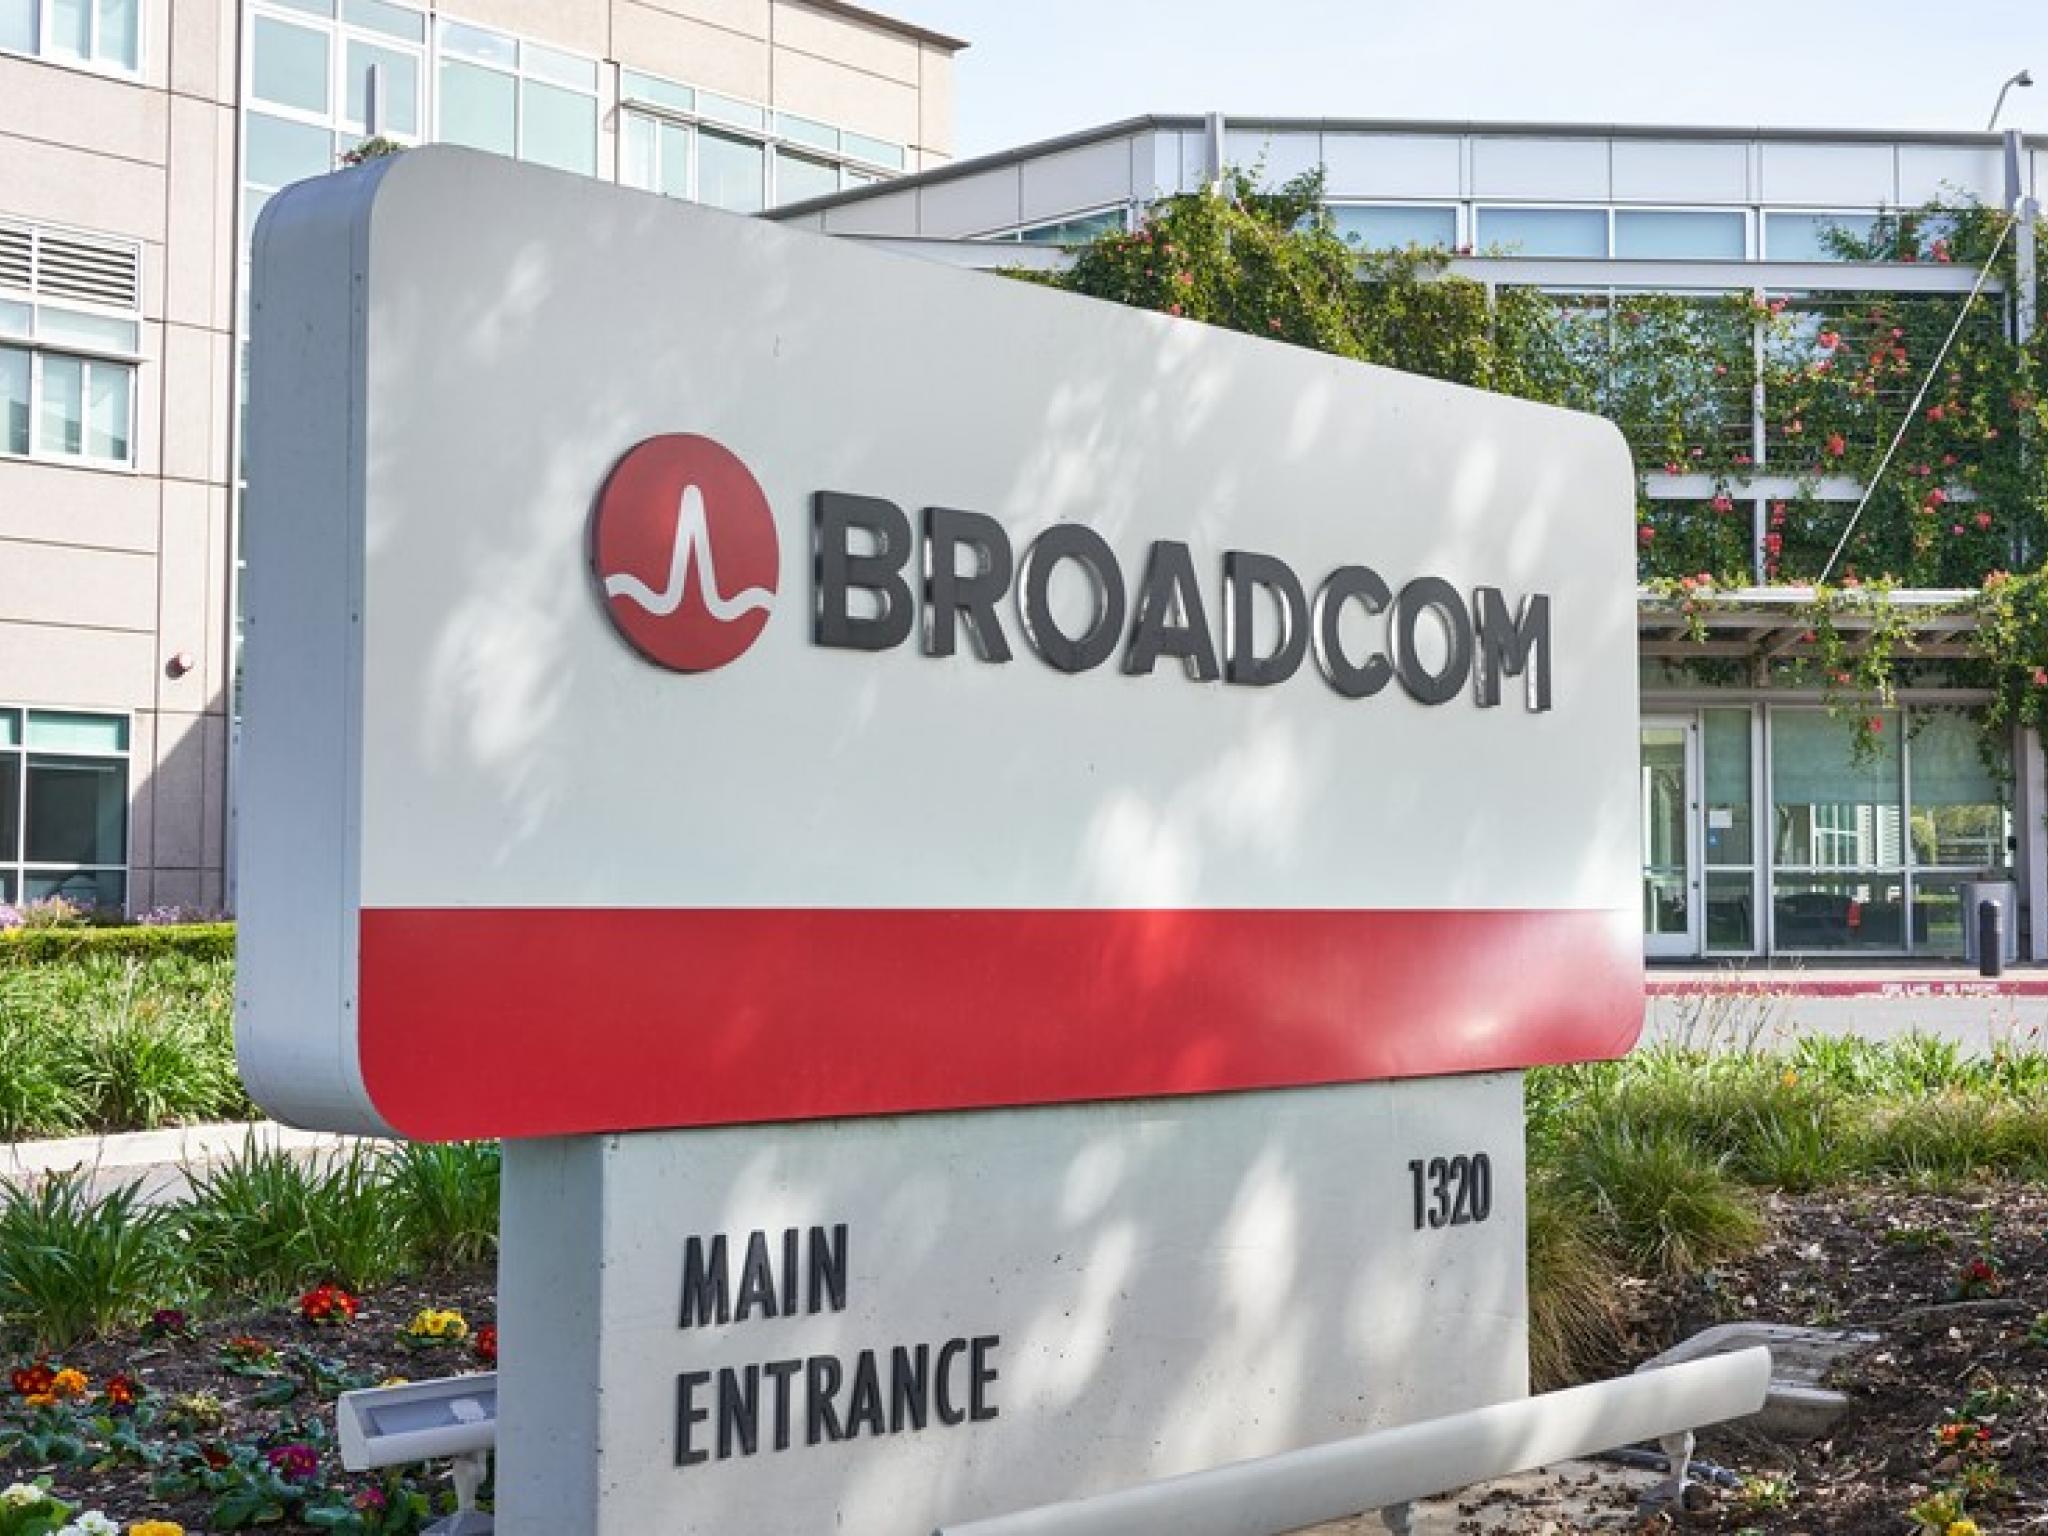  whats-going-on-with-broadcom-shares-friday 